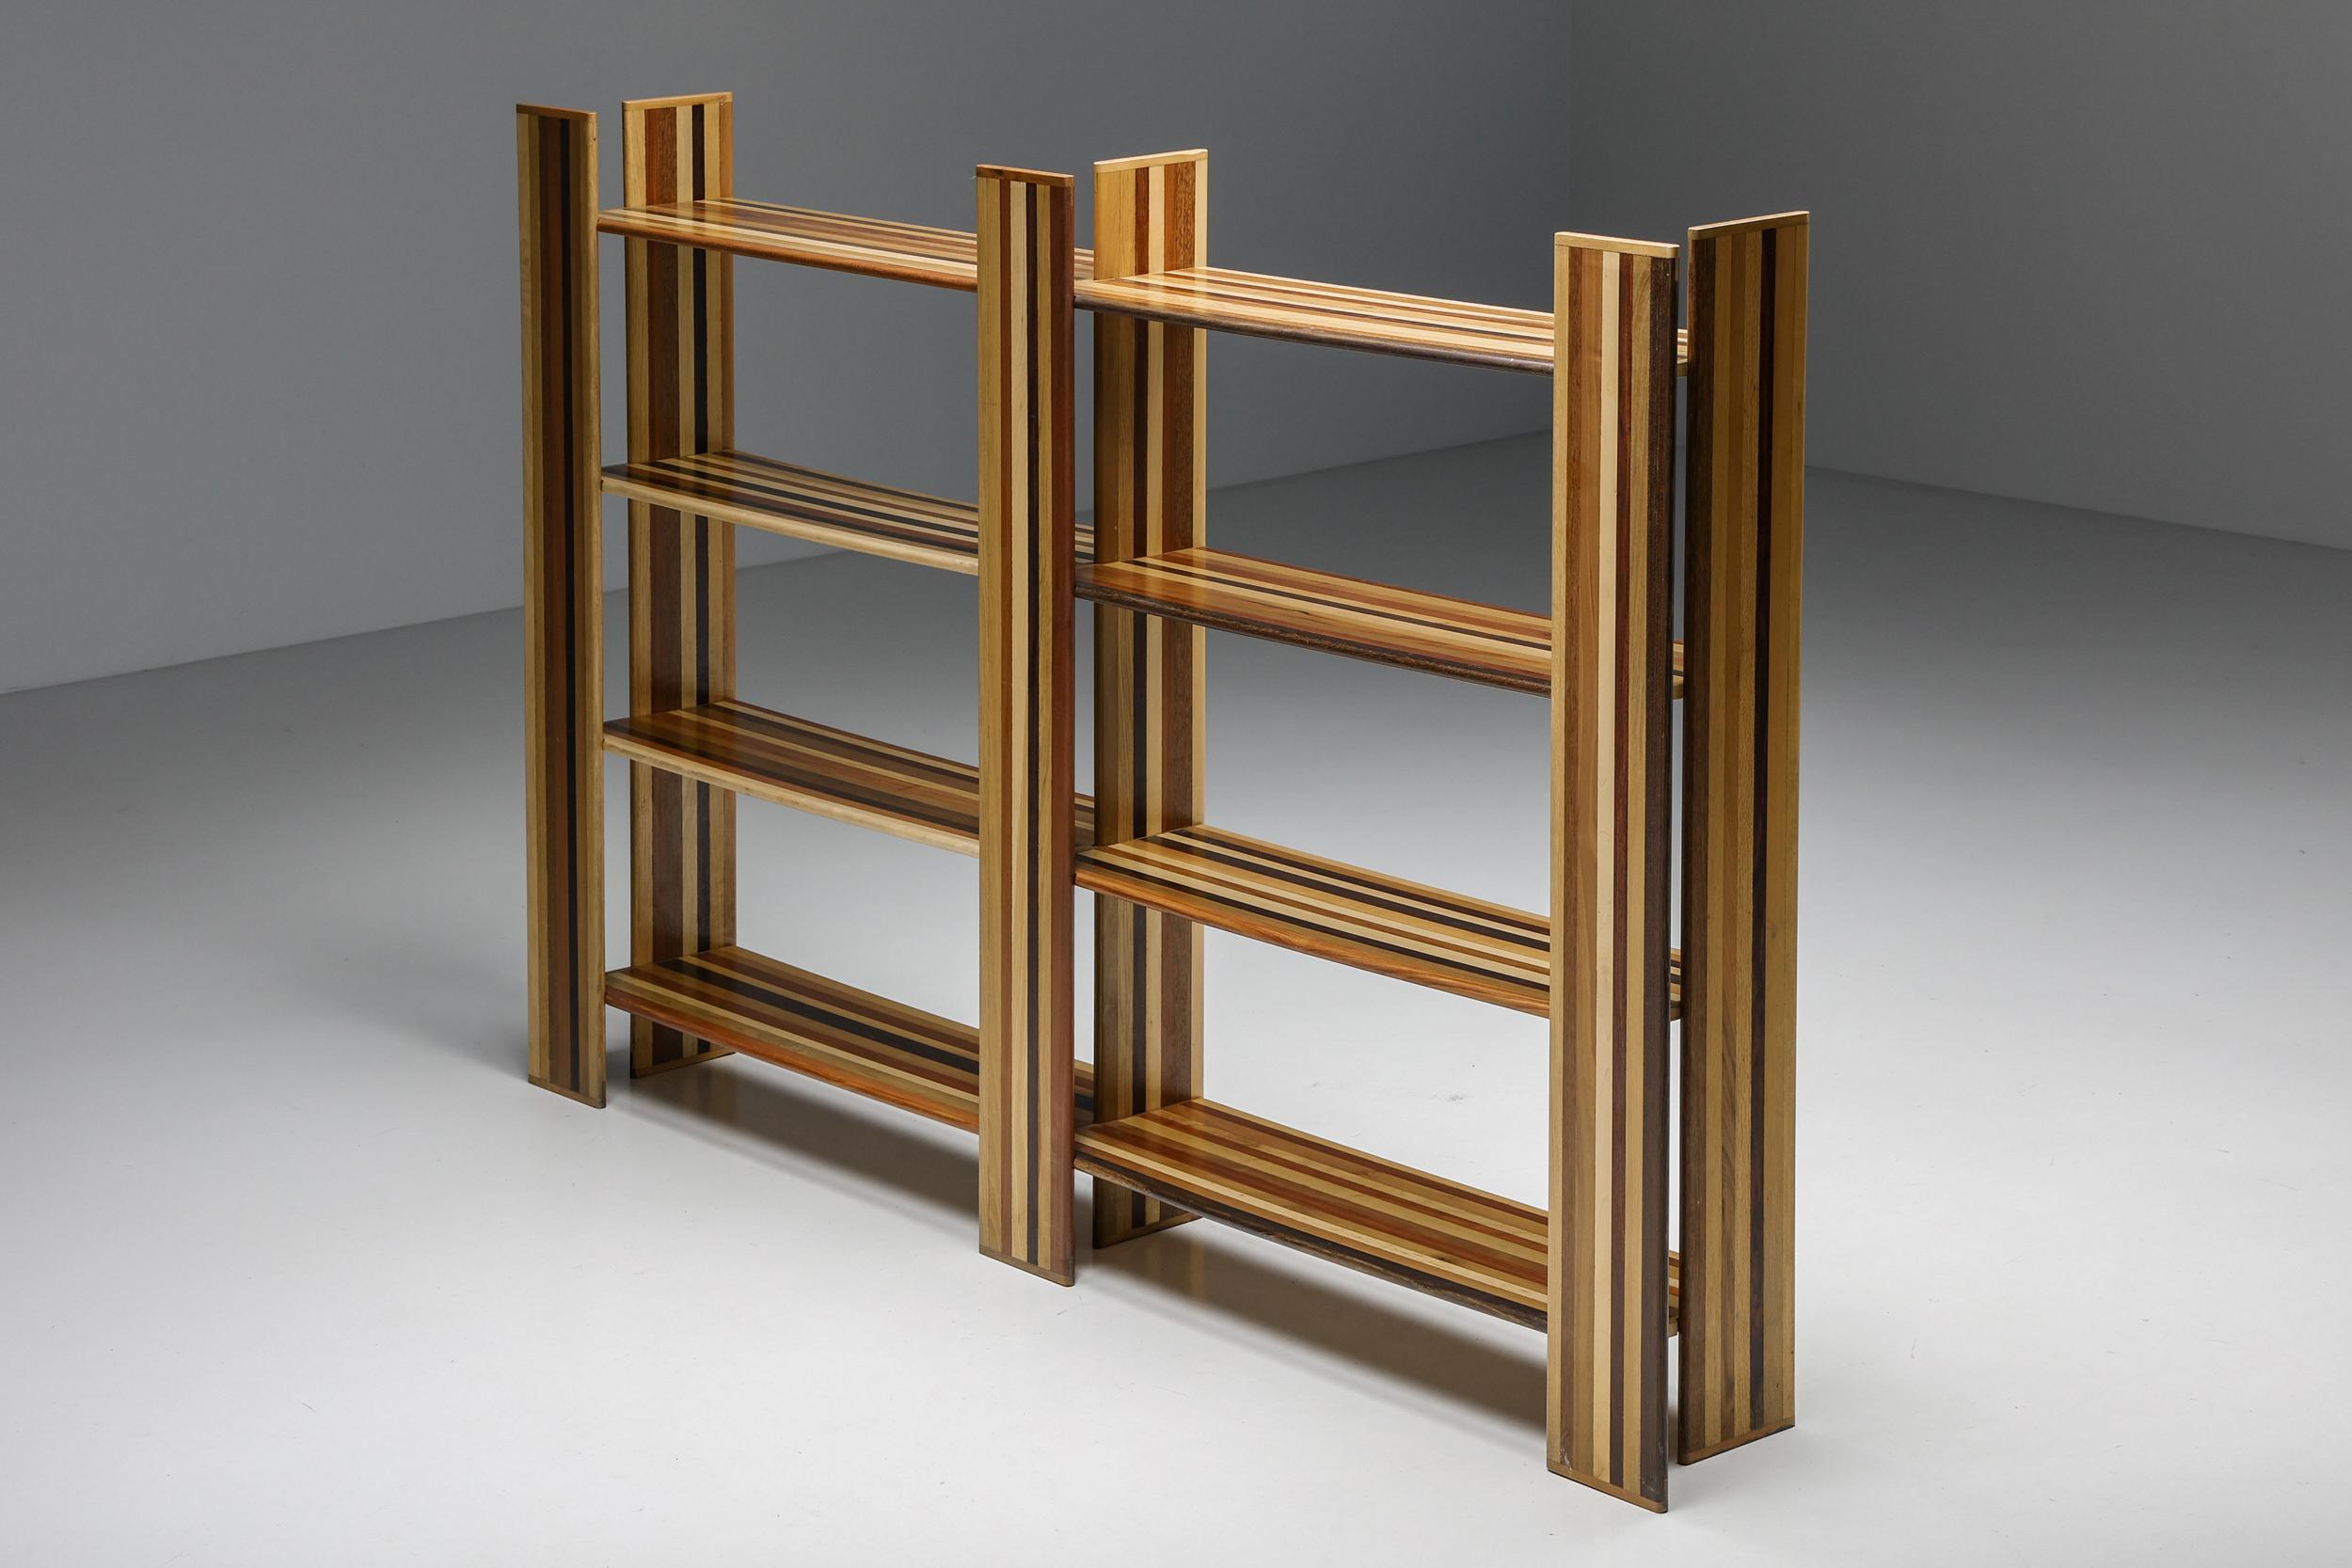 Afra & Tobia Scarpa Bookcase for Molteni, Italy, room divider, storage unit,1974

For this bookcase, Afra & Tobia Scarpa used scraps of veneer making and used them to create a new piece of furniture with two elements - a shelf and support. The